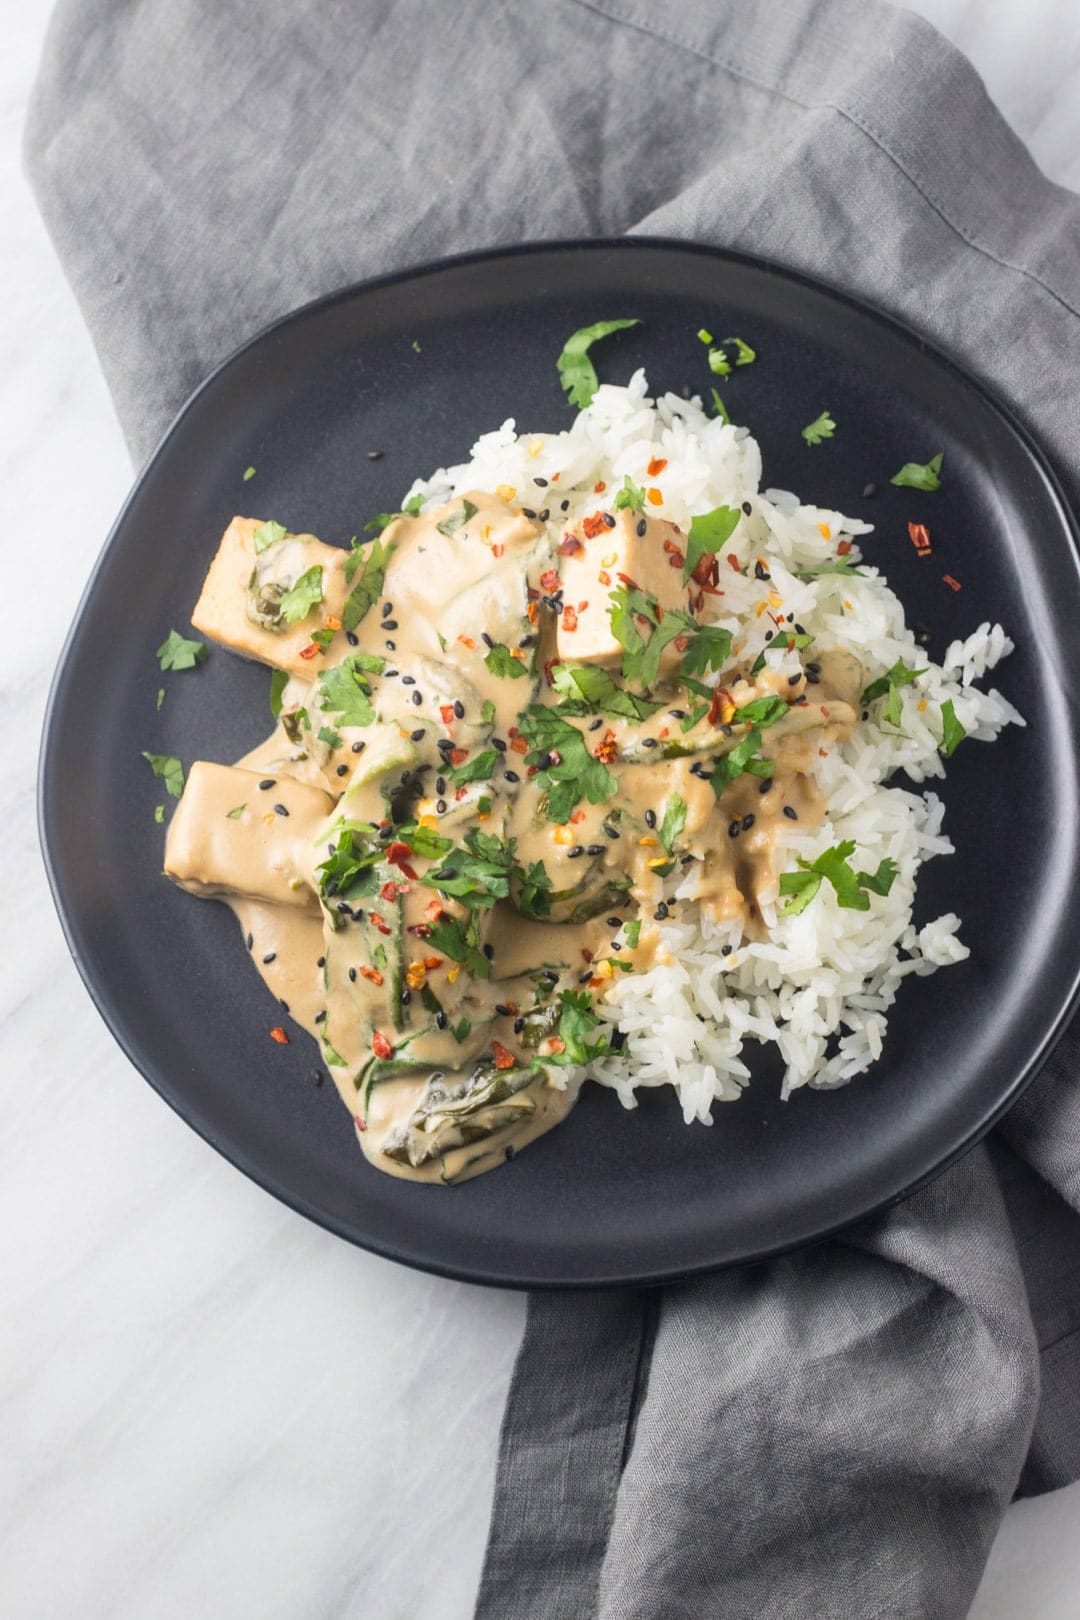 Tofu tossed in a creamy peanut butter and coconut sauce. It's served over white rice and garnished with red pepper flakes and chopped cilantro.